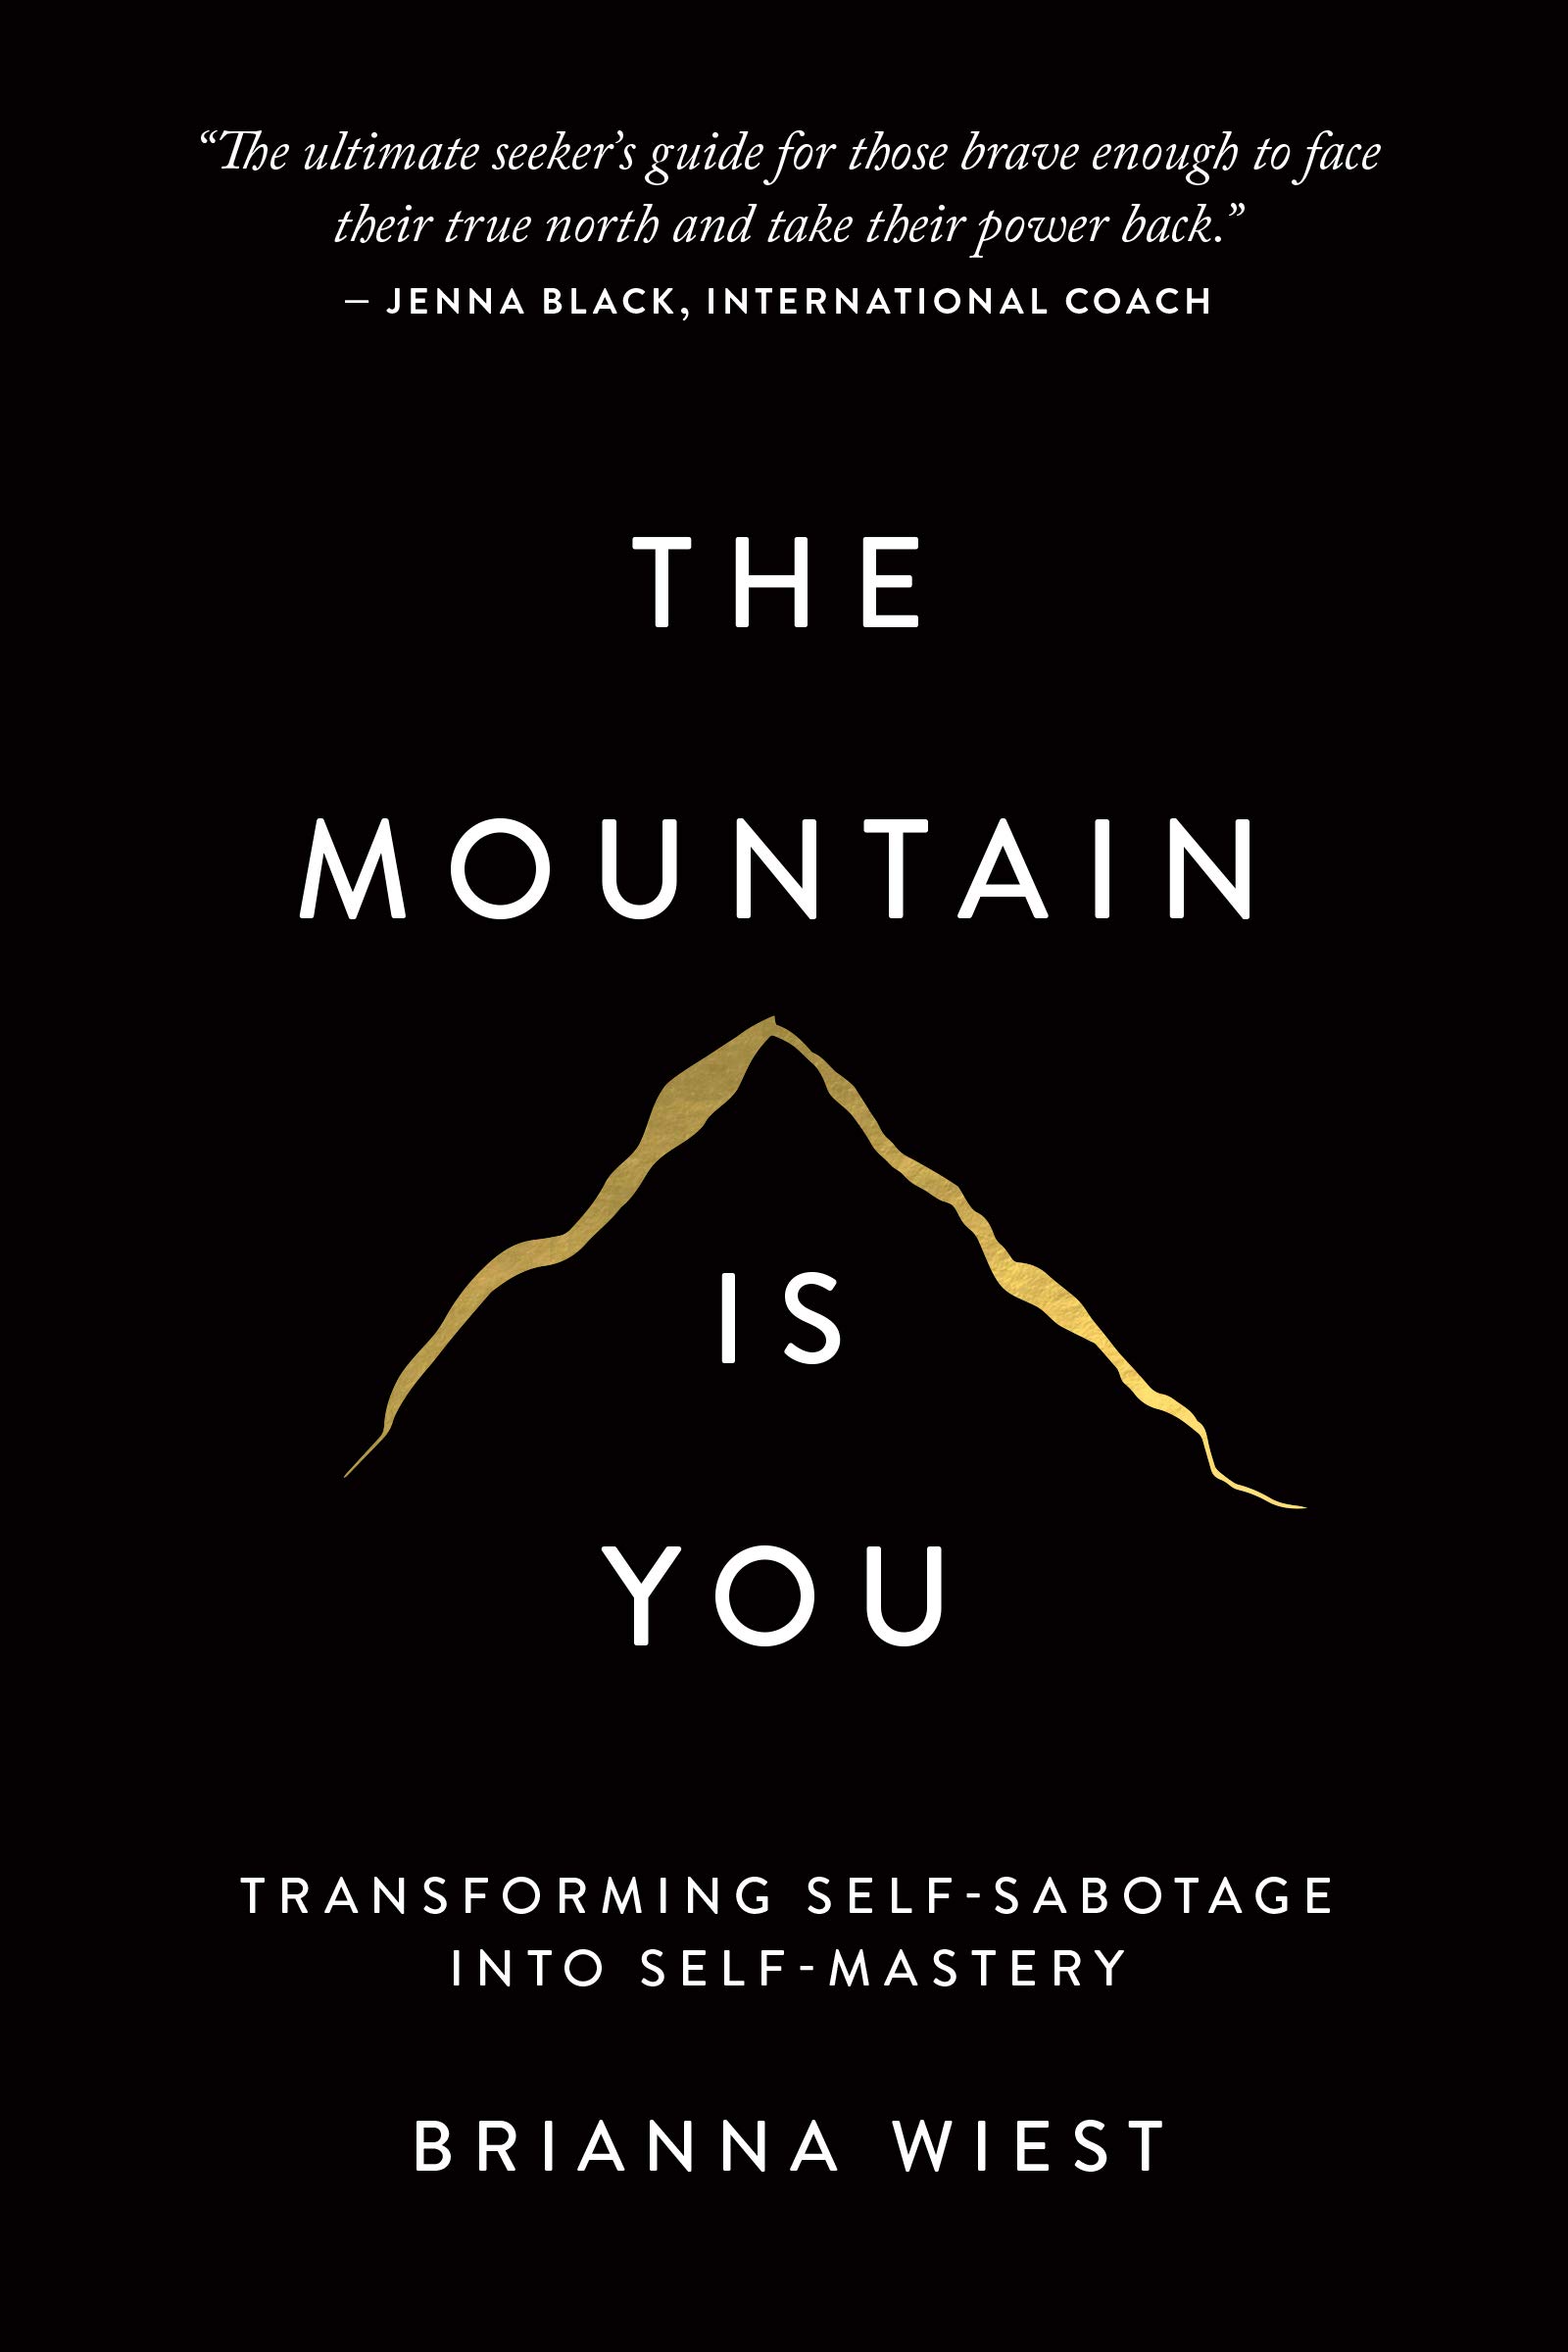 The Mountain Is You Transforming Self-Sabotage Into Self-Mastery by Brianna Wiest